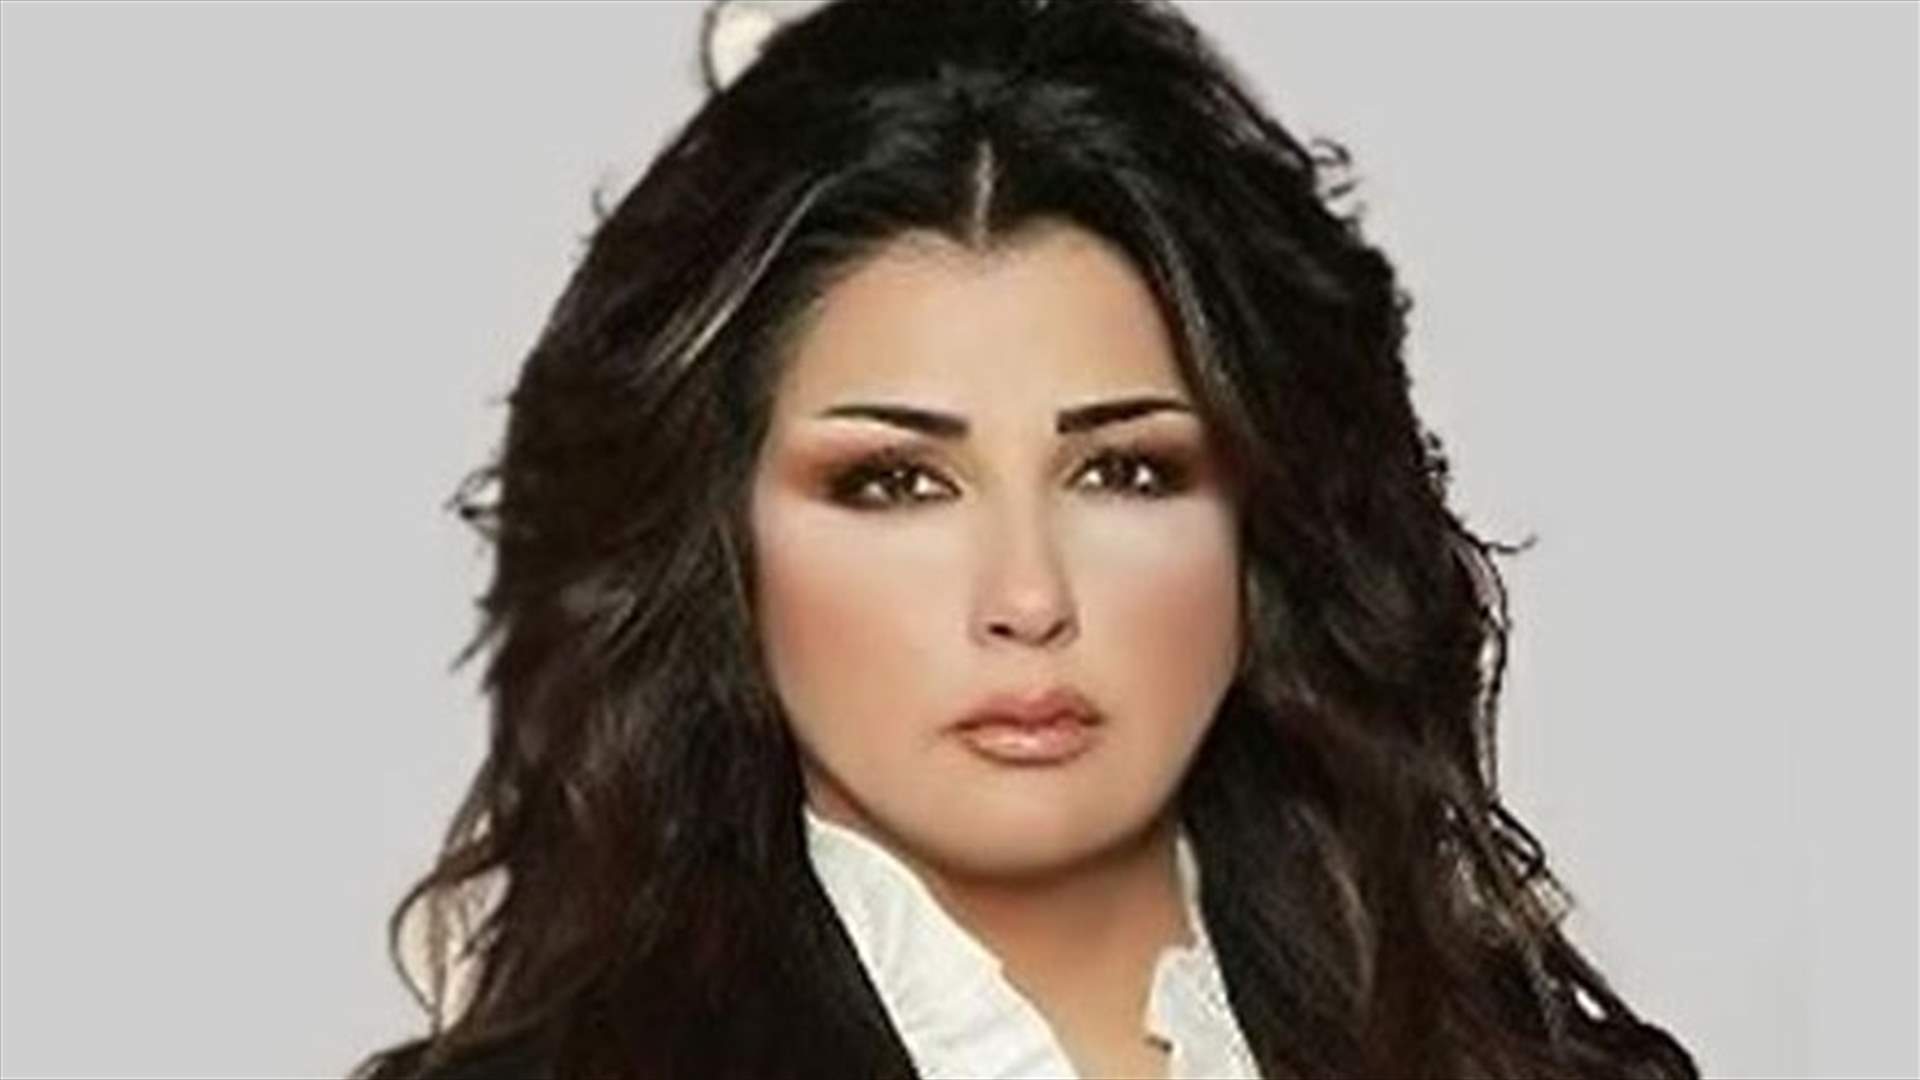 [PHOTO] Court summons Maalouf after her tweets against Nasrallah